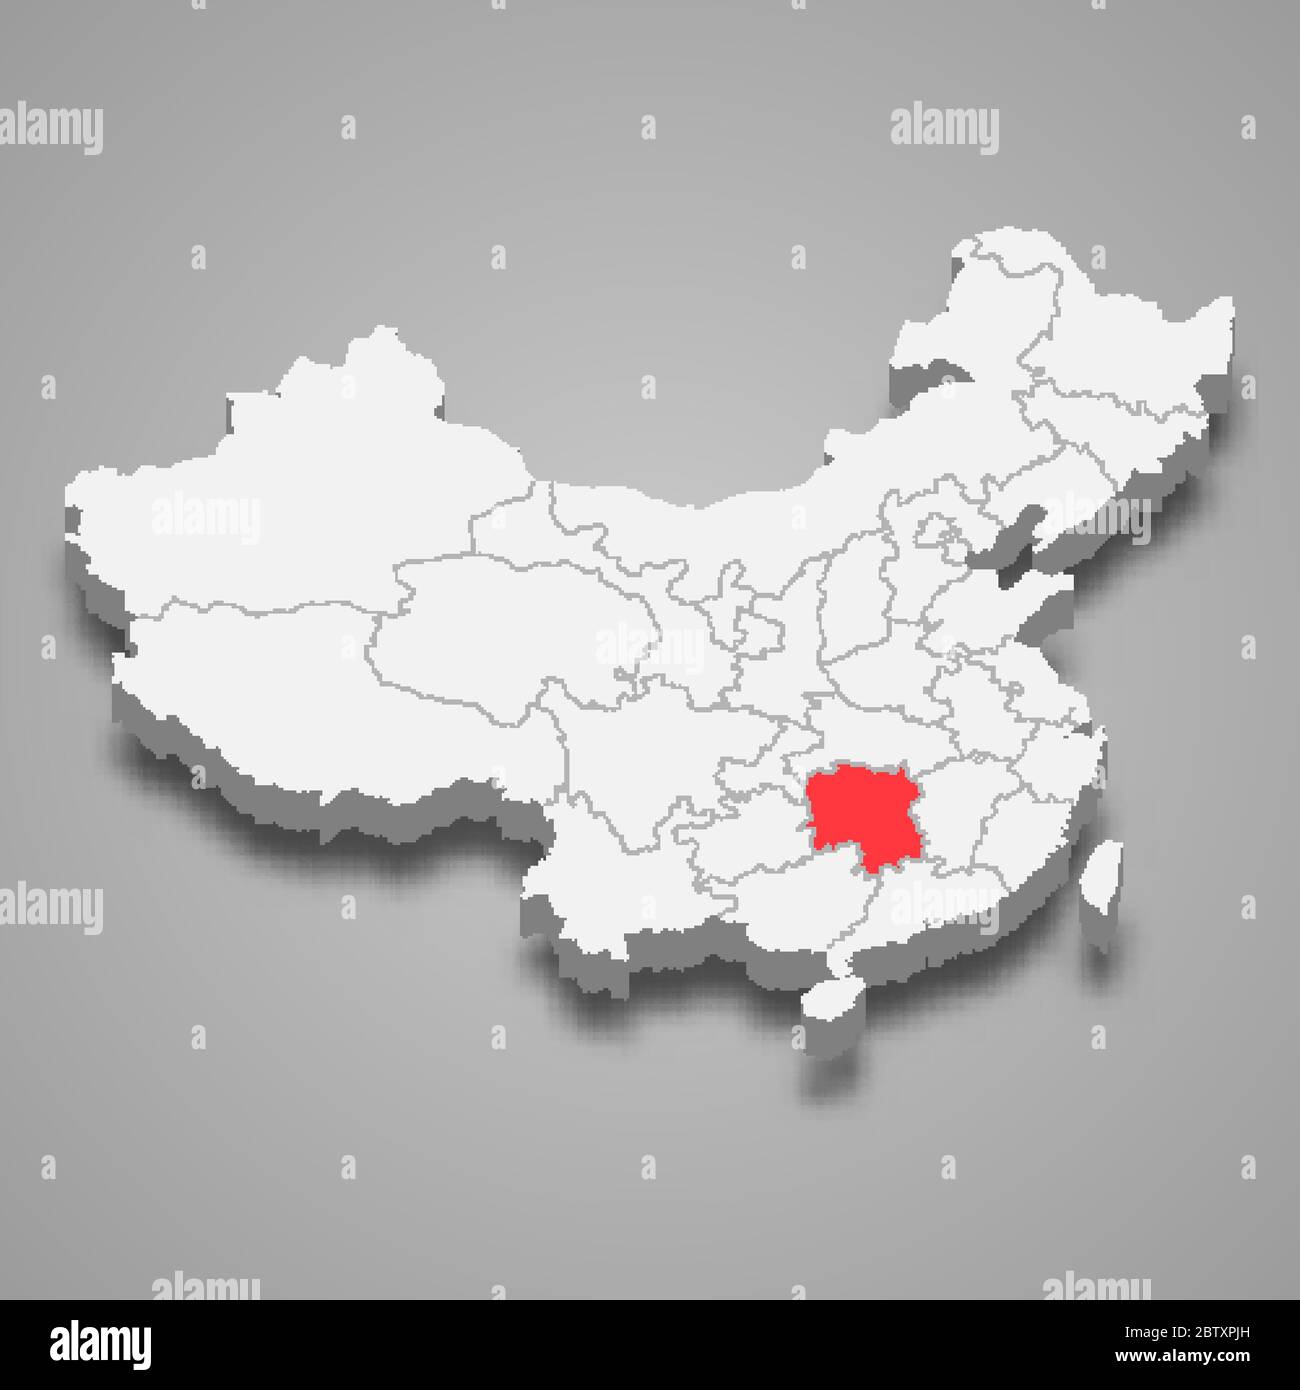 Hunan province location within China 3d map Stock Vector